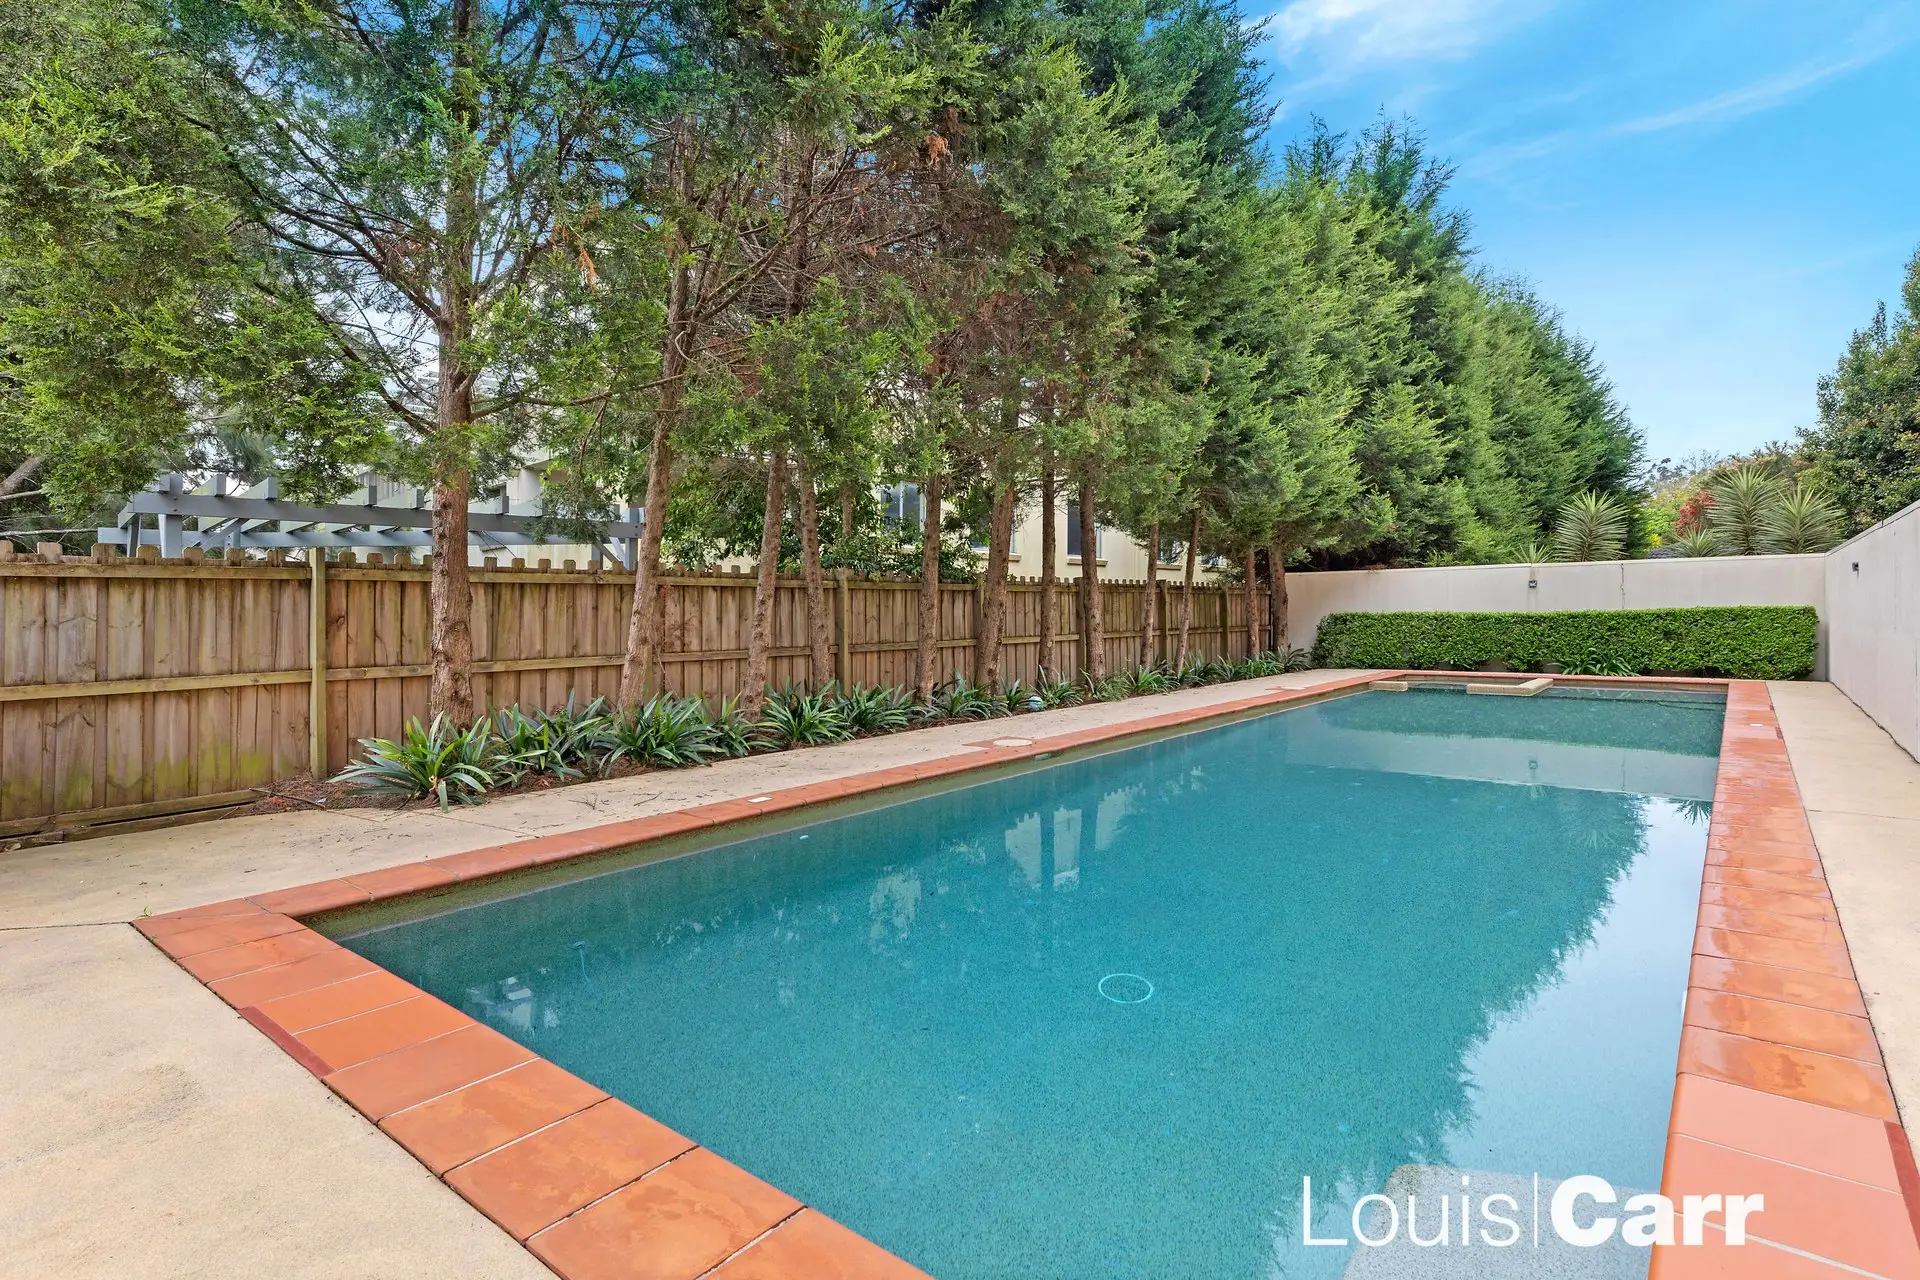 Photo #12: 24/7-15 Purser Avenue, Castle Hill - Sold by Louis Carr Real Estate